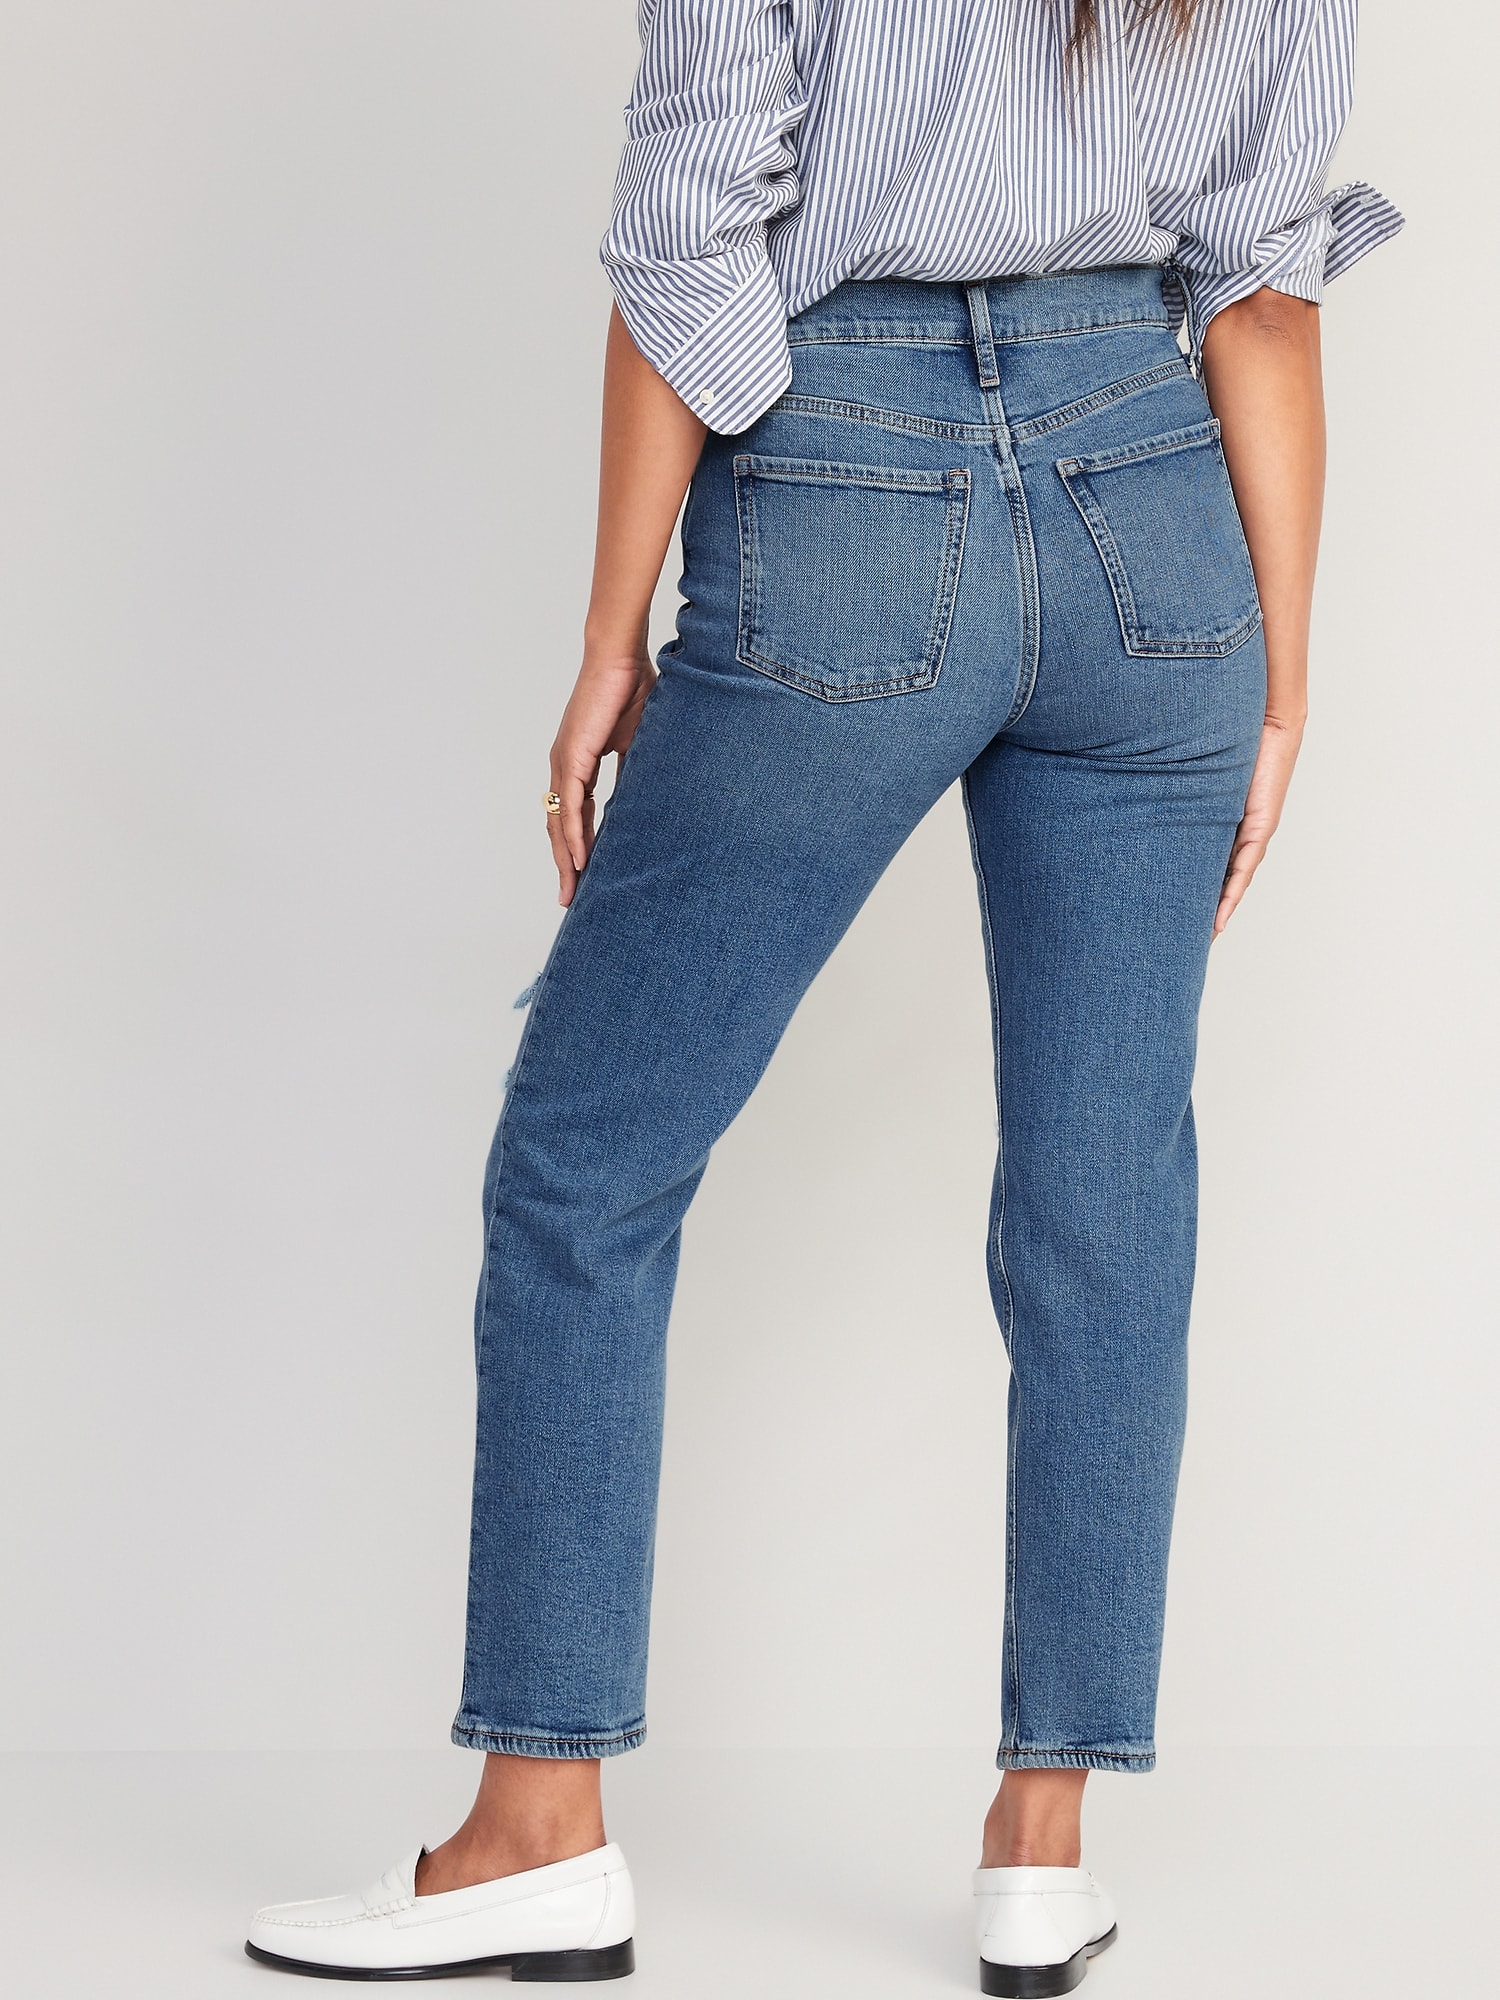 Extra High-Waisted Button-Fly Sky-Hi Straight Ripped Jeans for Women ...